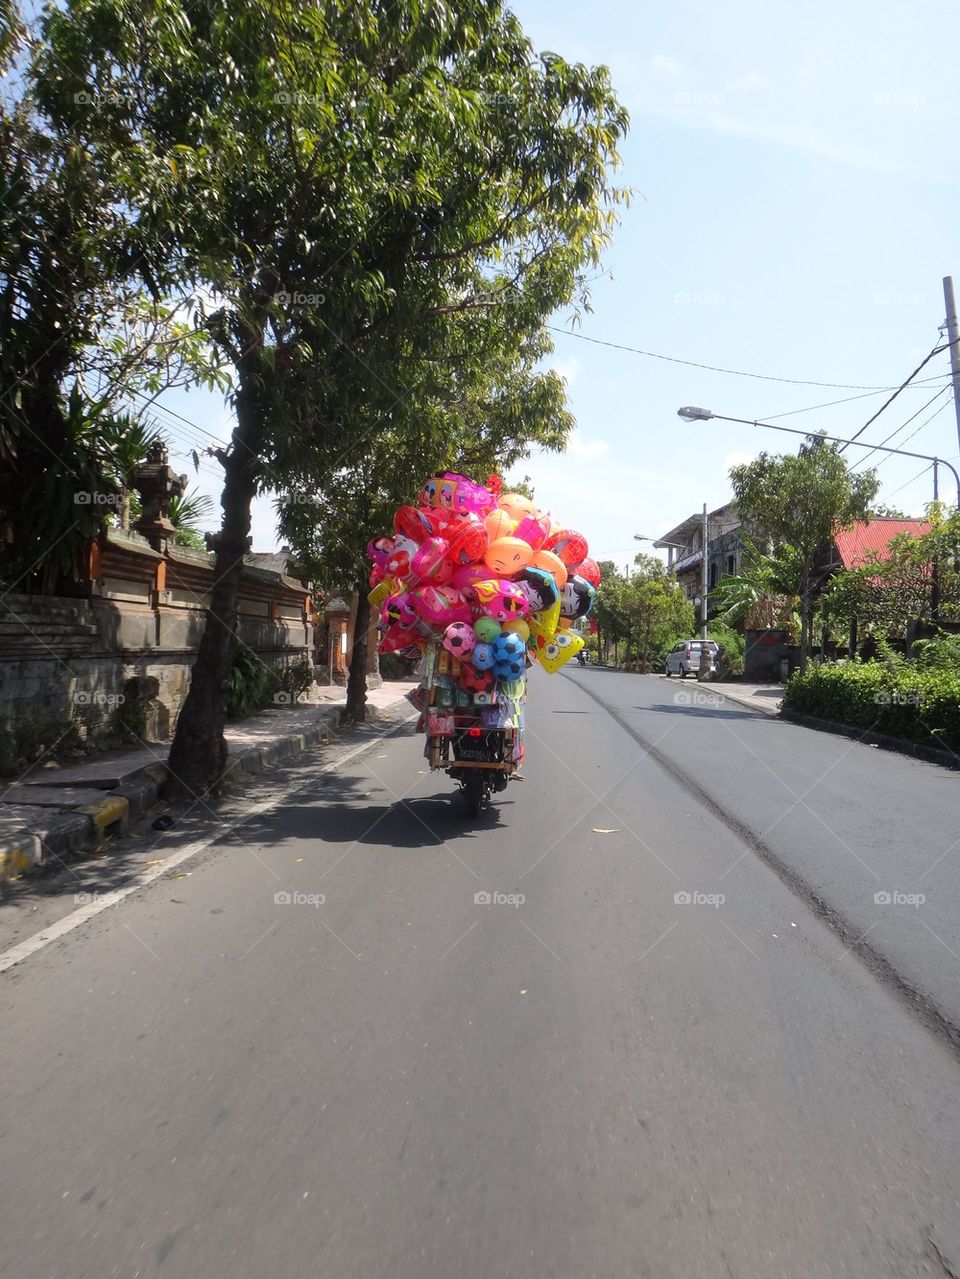 Balloons on the go